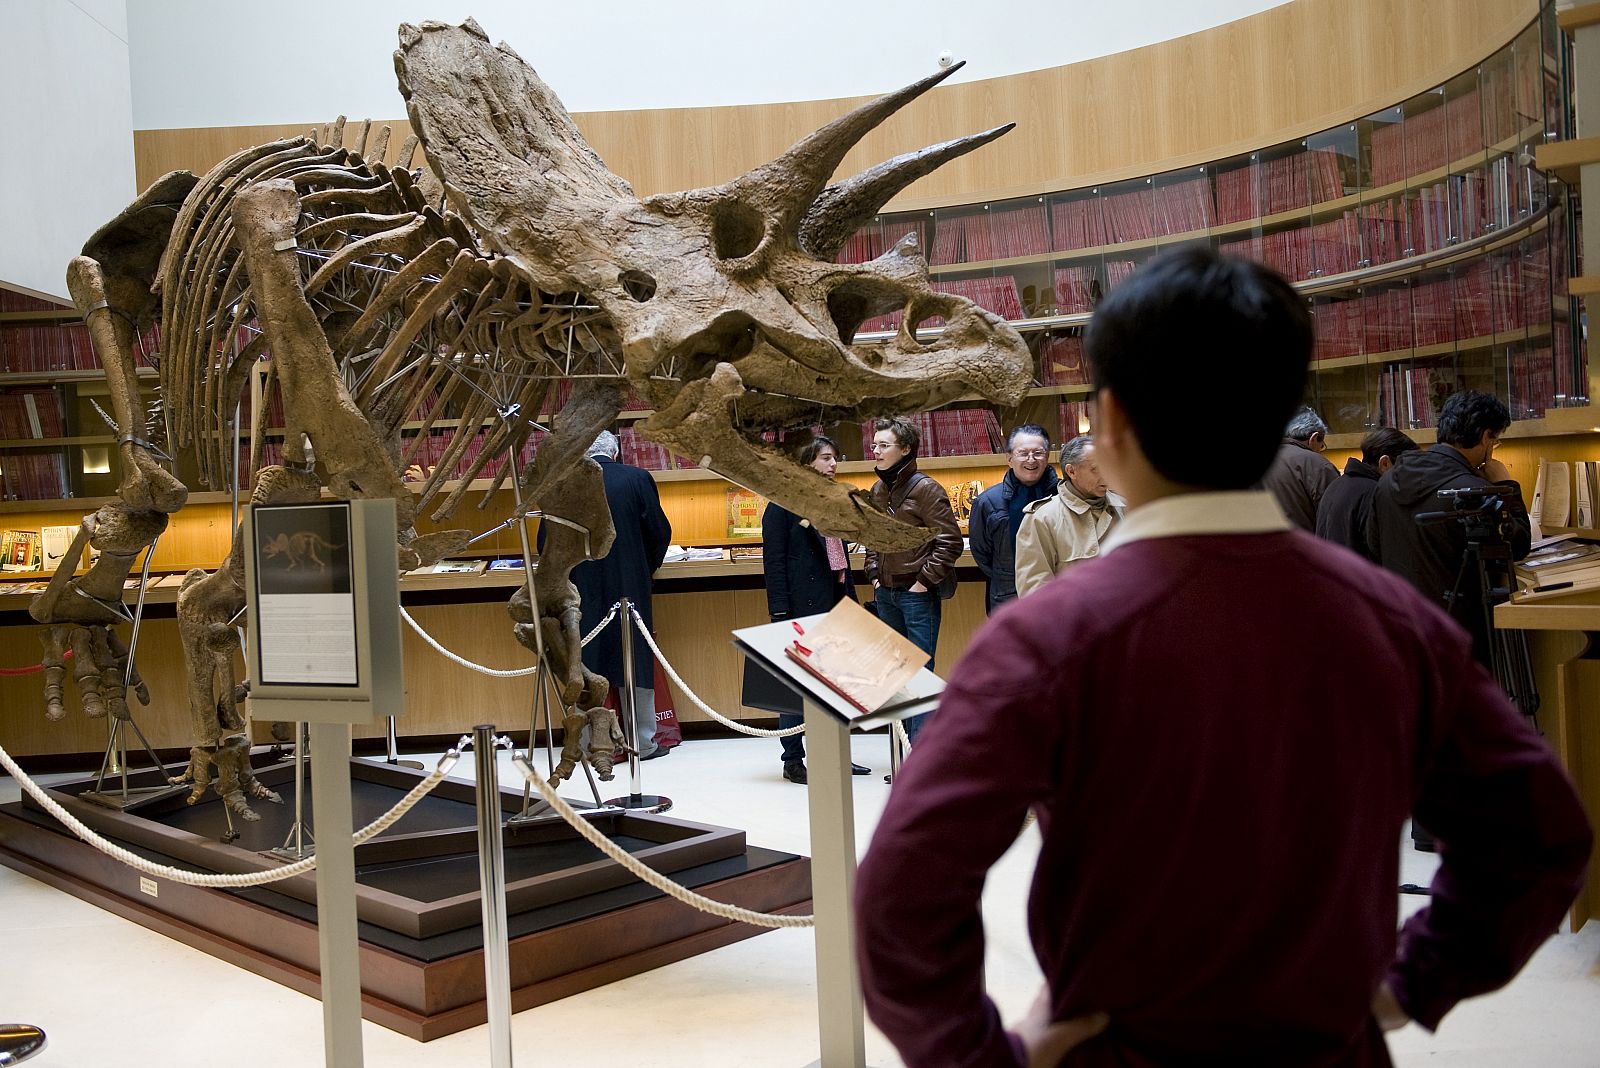 A visitor looks at a Triceratops skeleton at the Christie's auction house in Paris